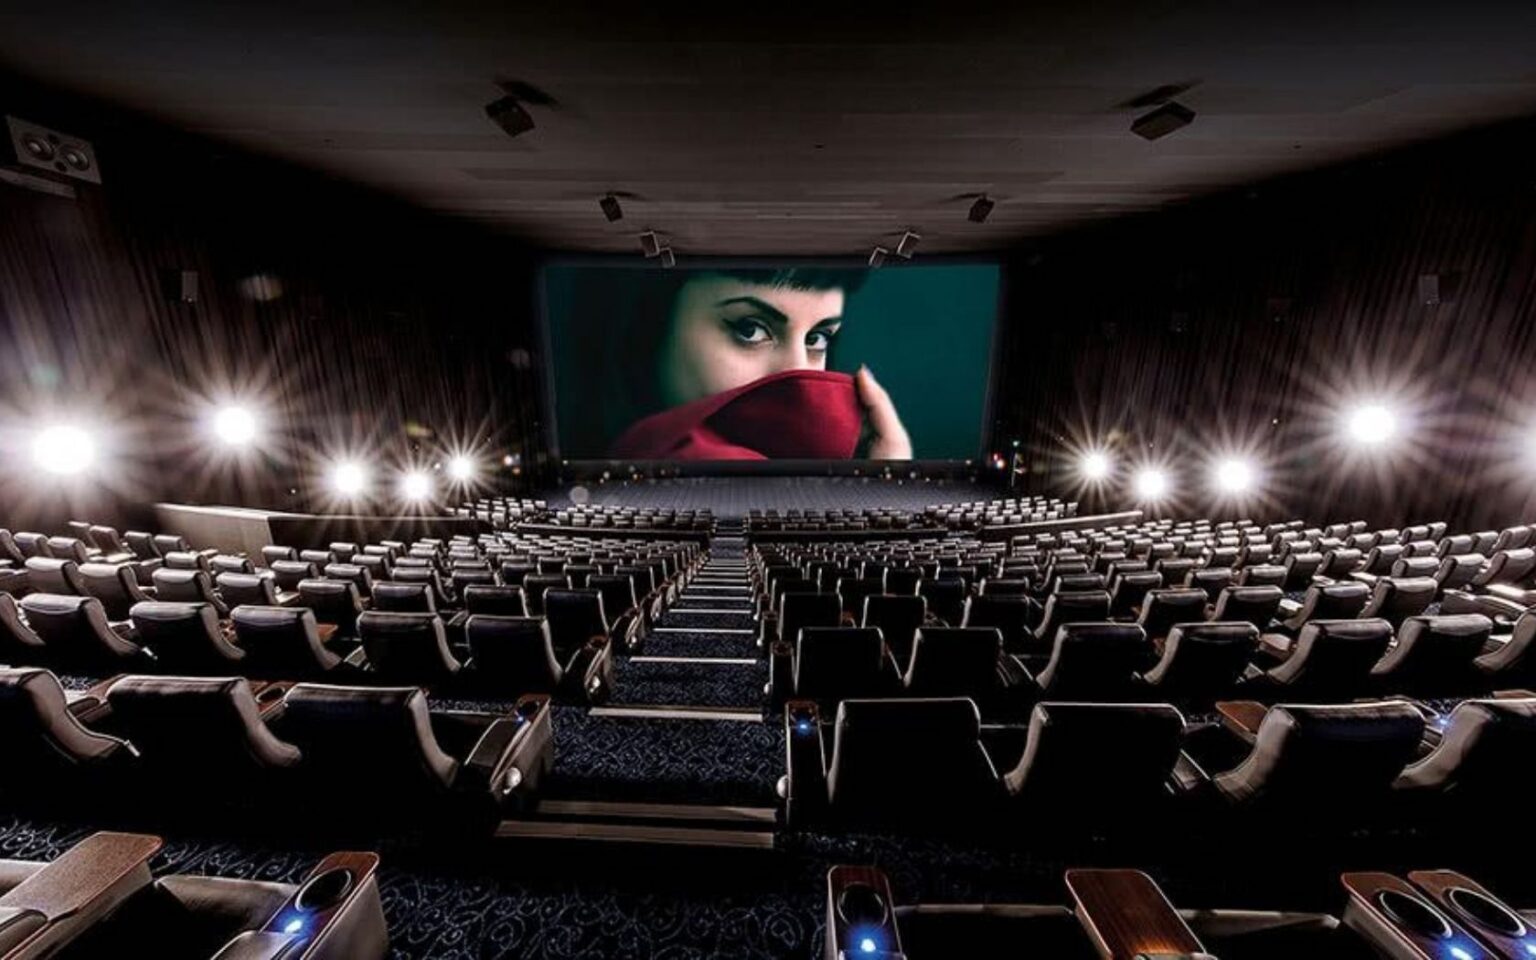 Book the Cinema enables users to book a private, VIP cinema event of the latest releases and more. Find out more about these private movie screenings!